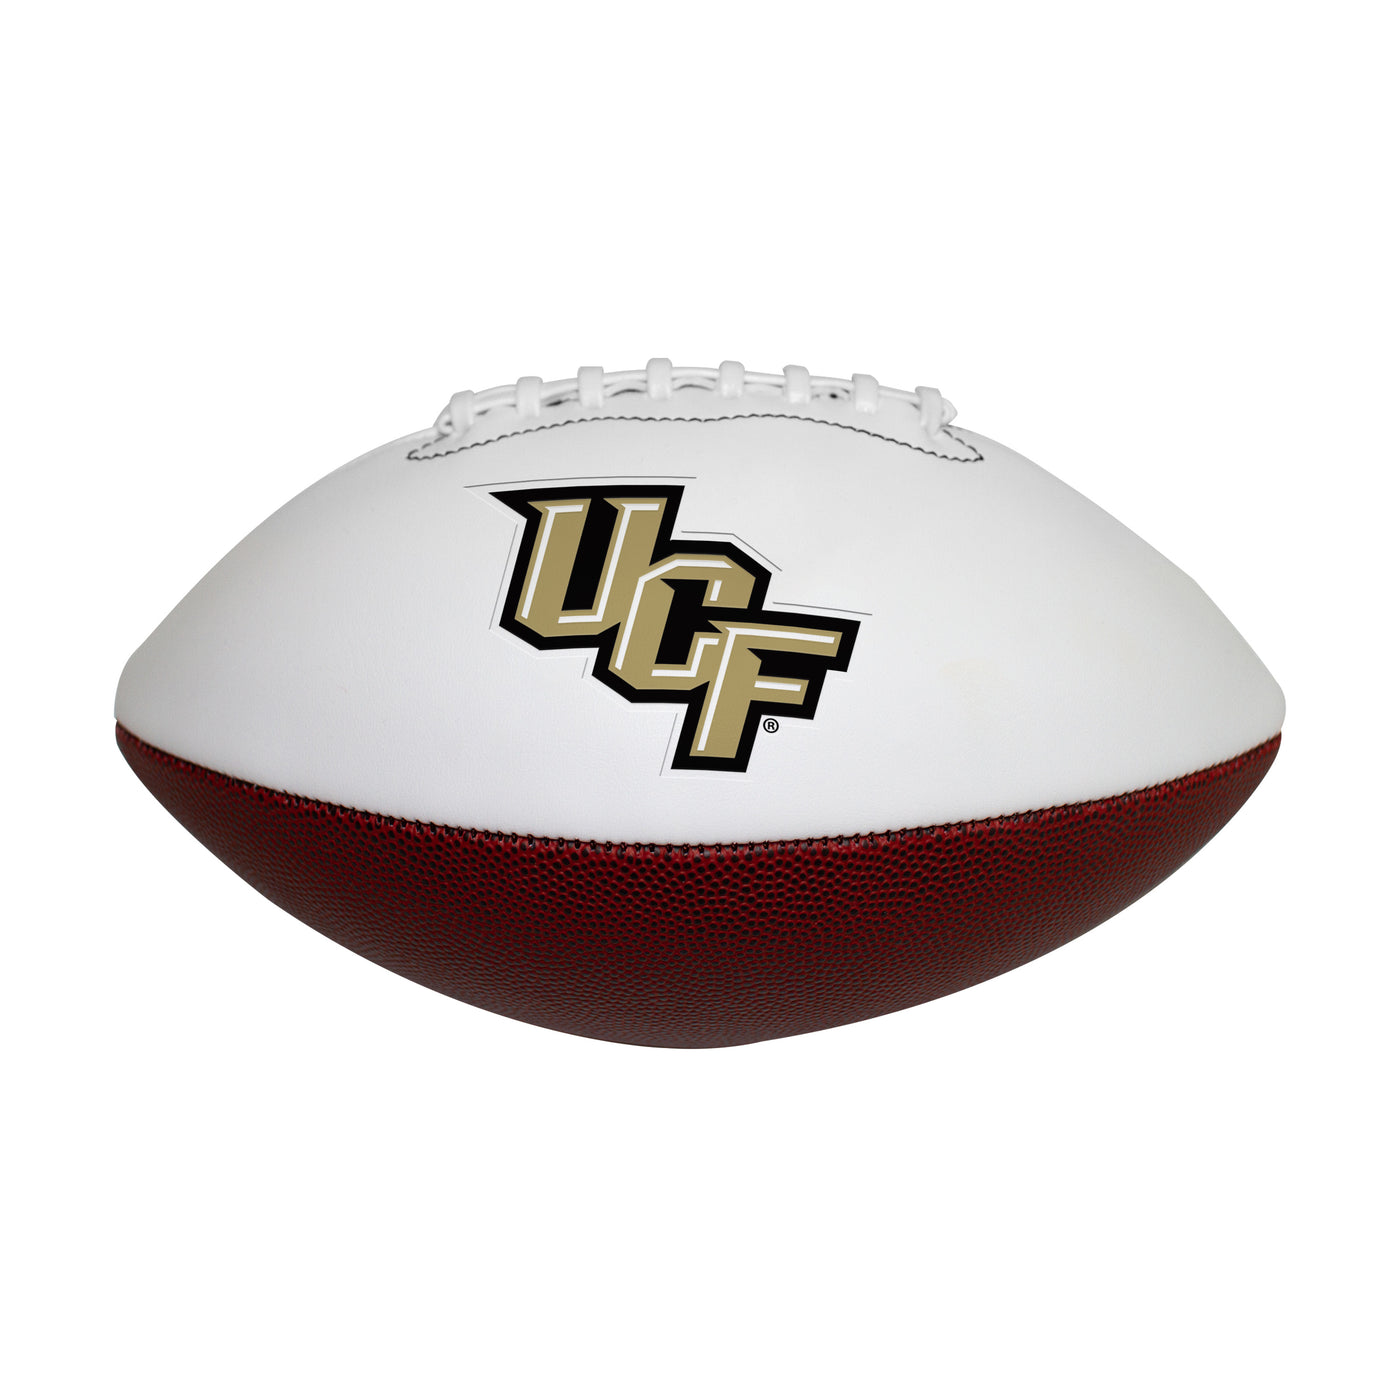 University of Central Florida Official-Size Autograph Football